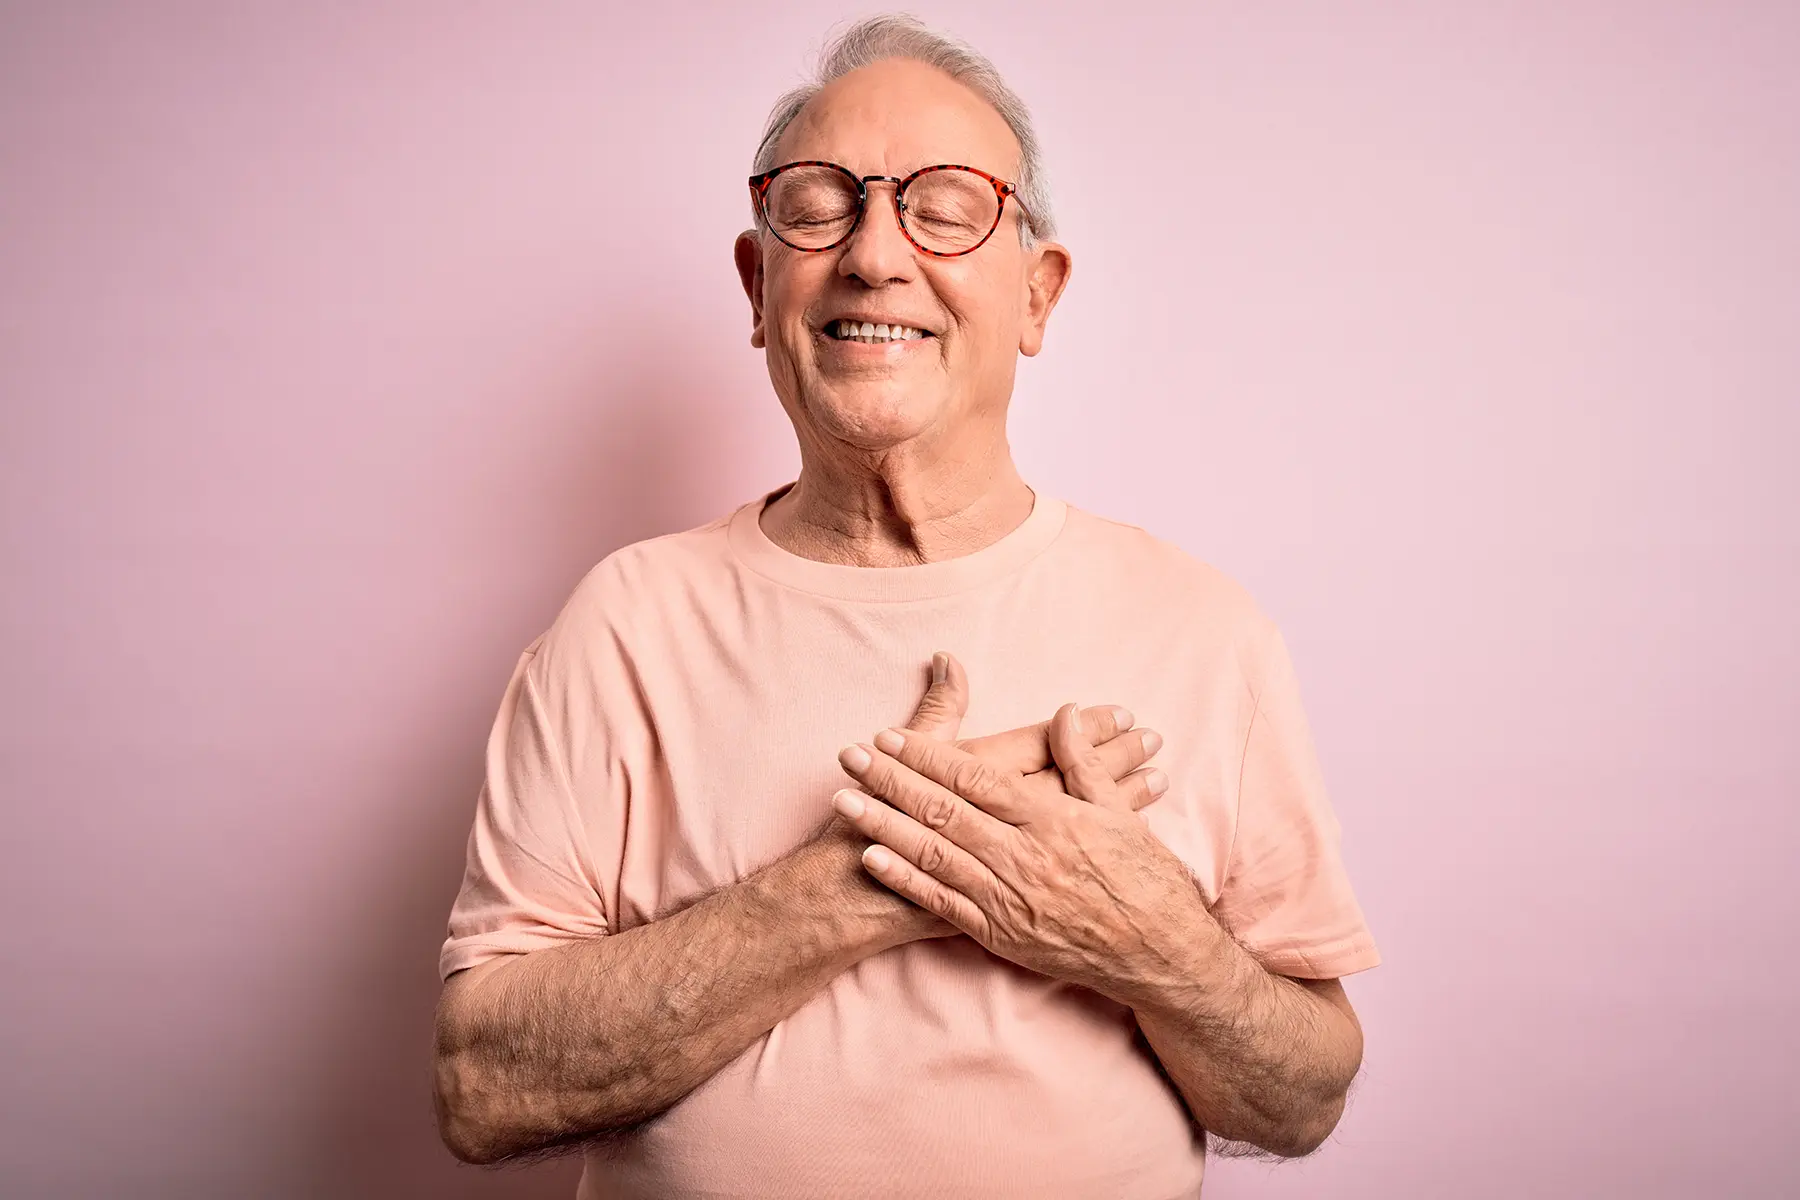 Old man smiling holding his heart